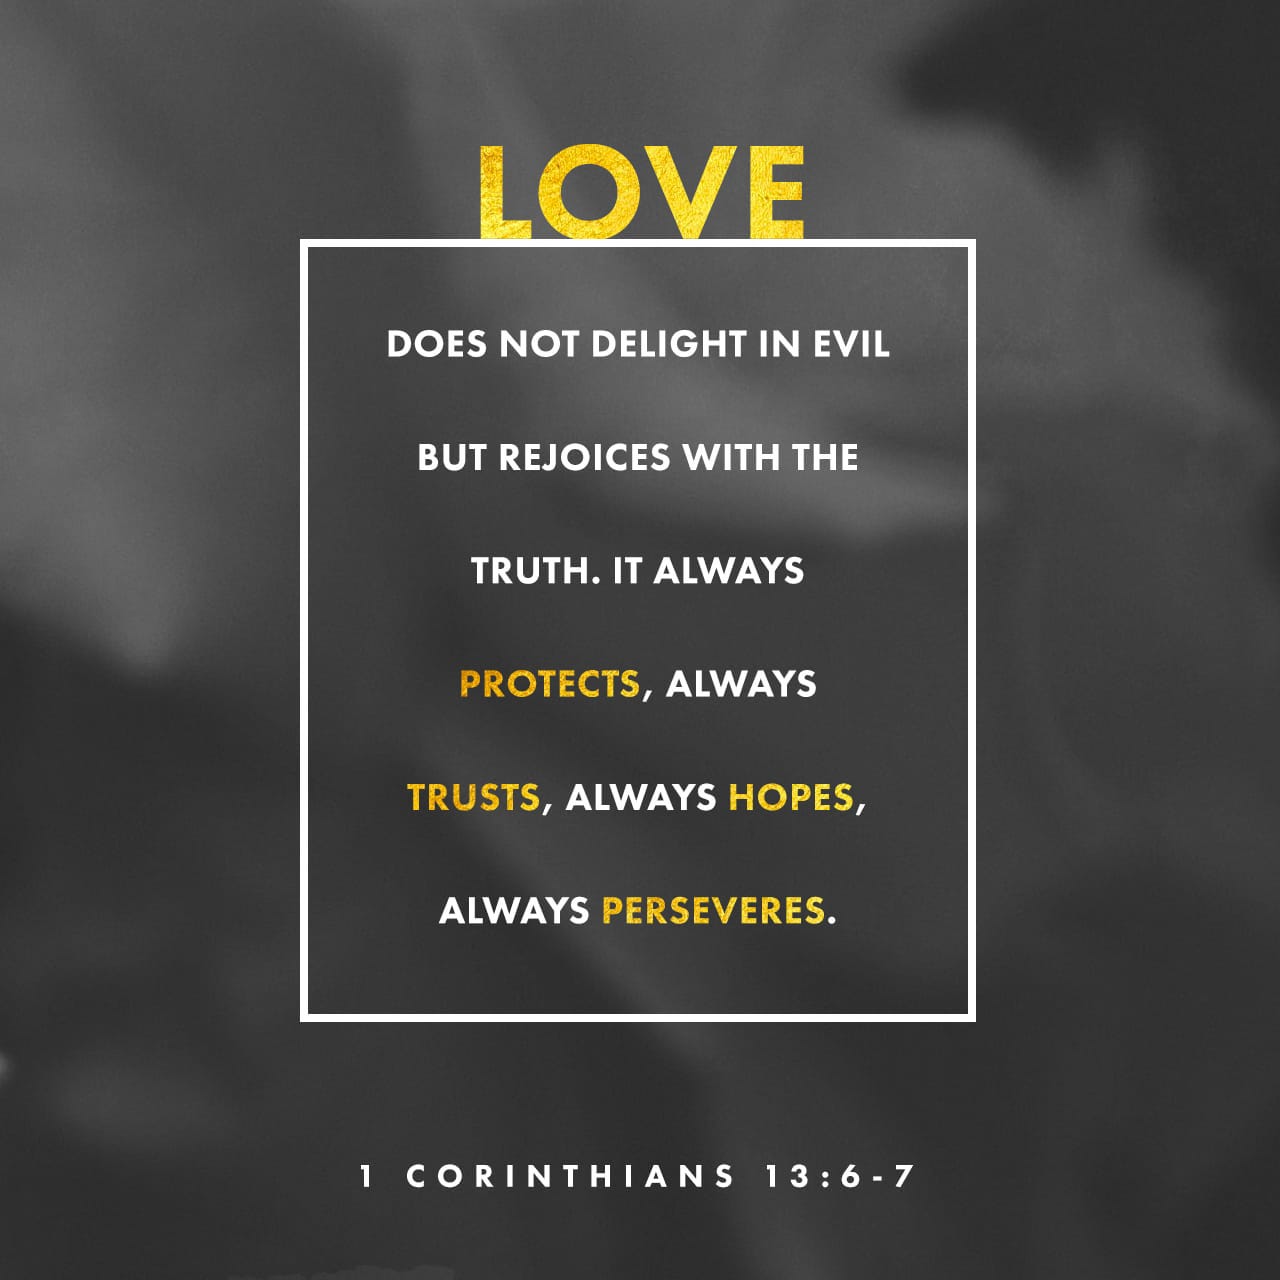 Bible Verse of the Day - day 129 - image 1192 (1 Corinthians 13:7)